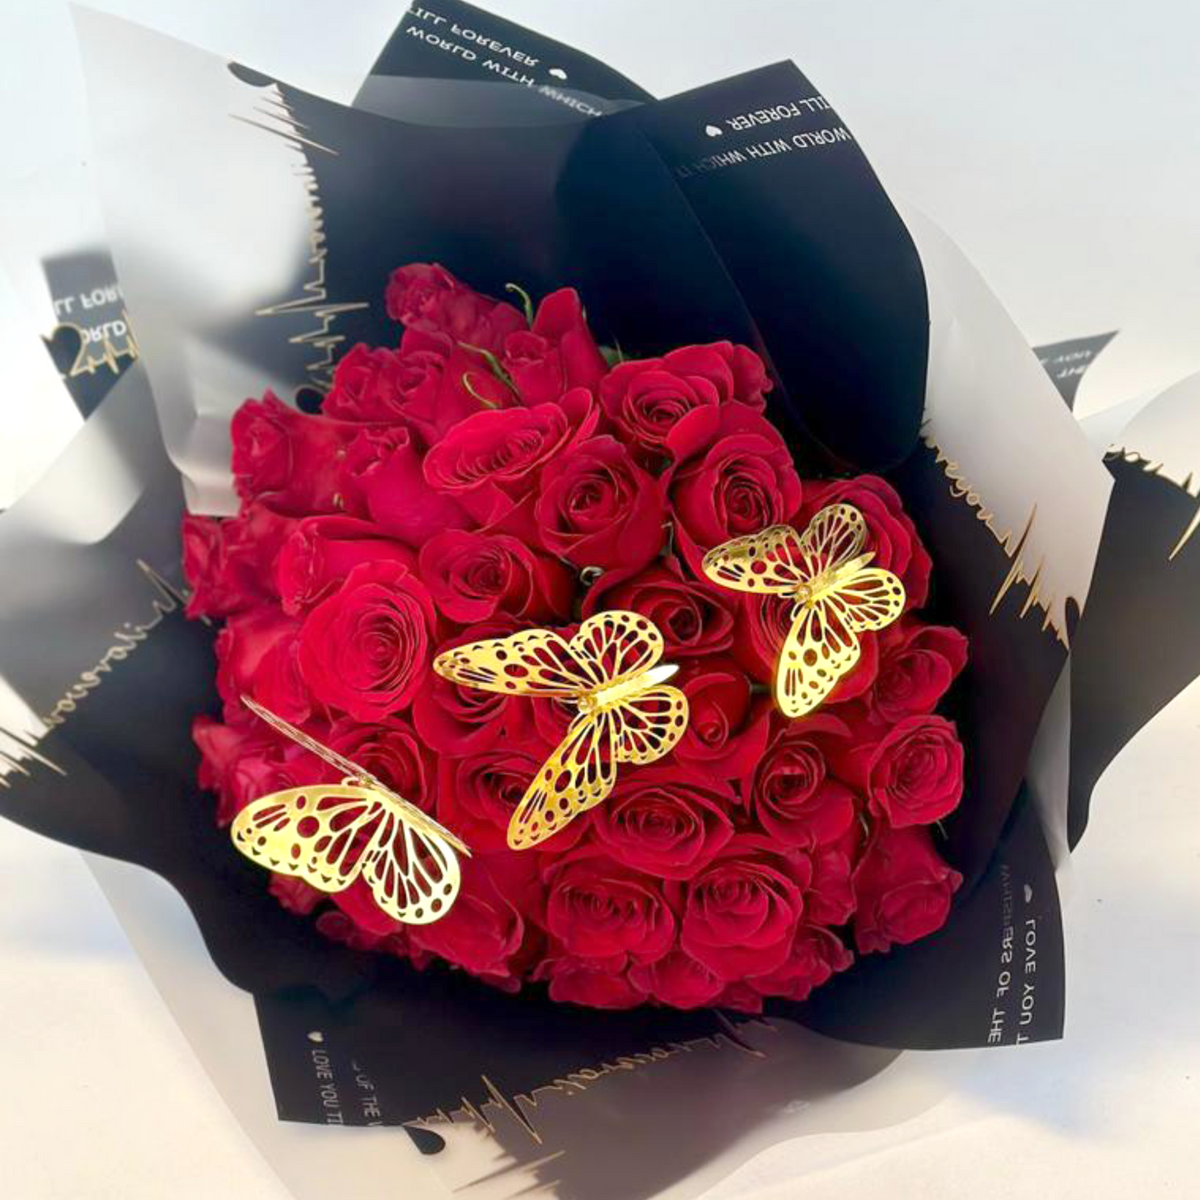 50 Premium Red Roses Wrapped with Gold Butterflies